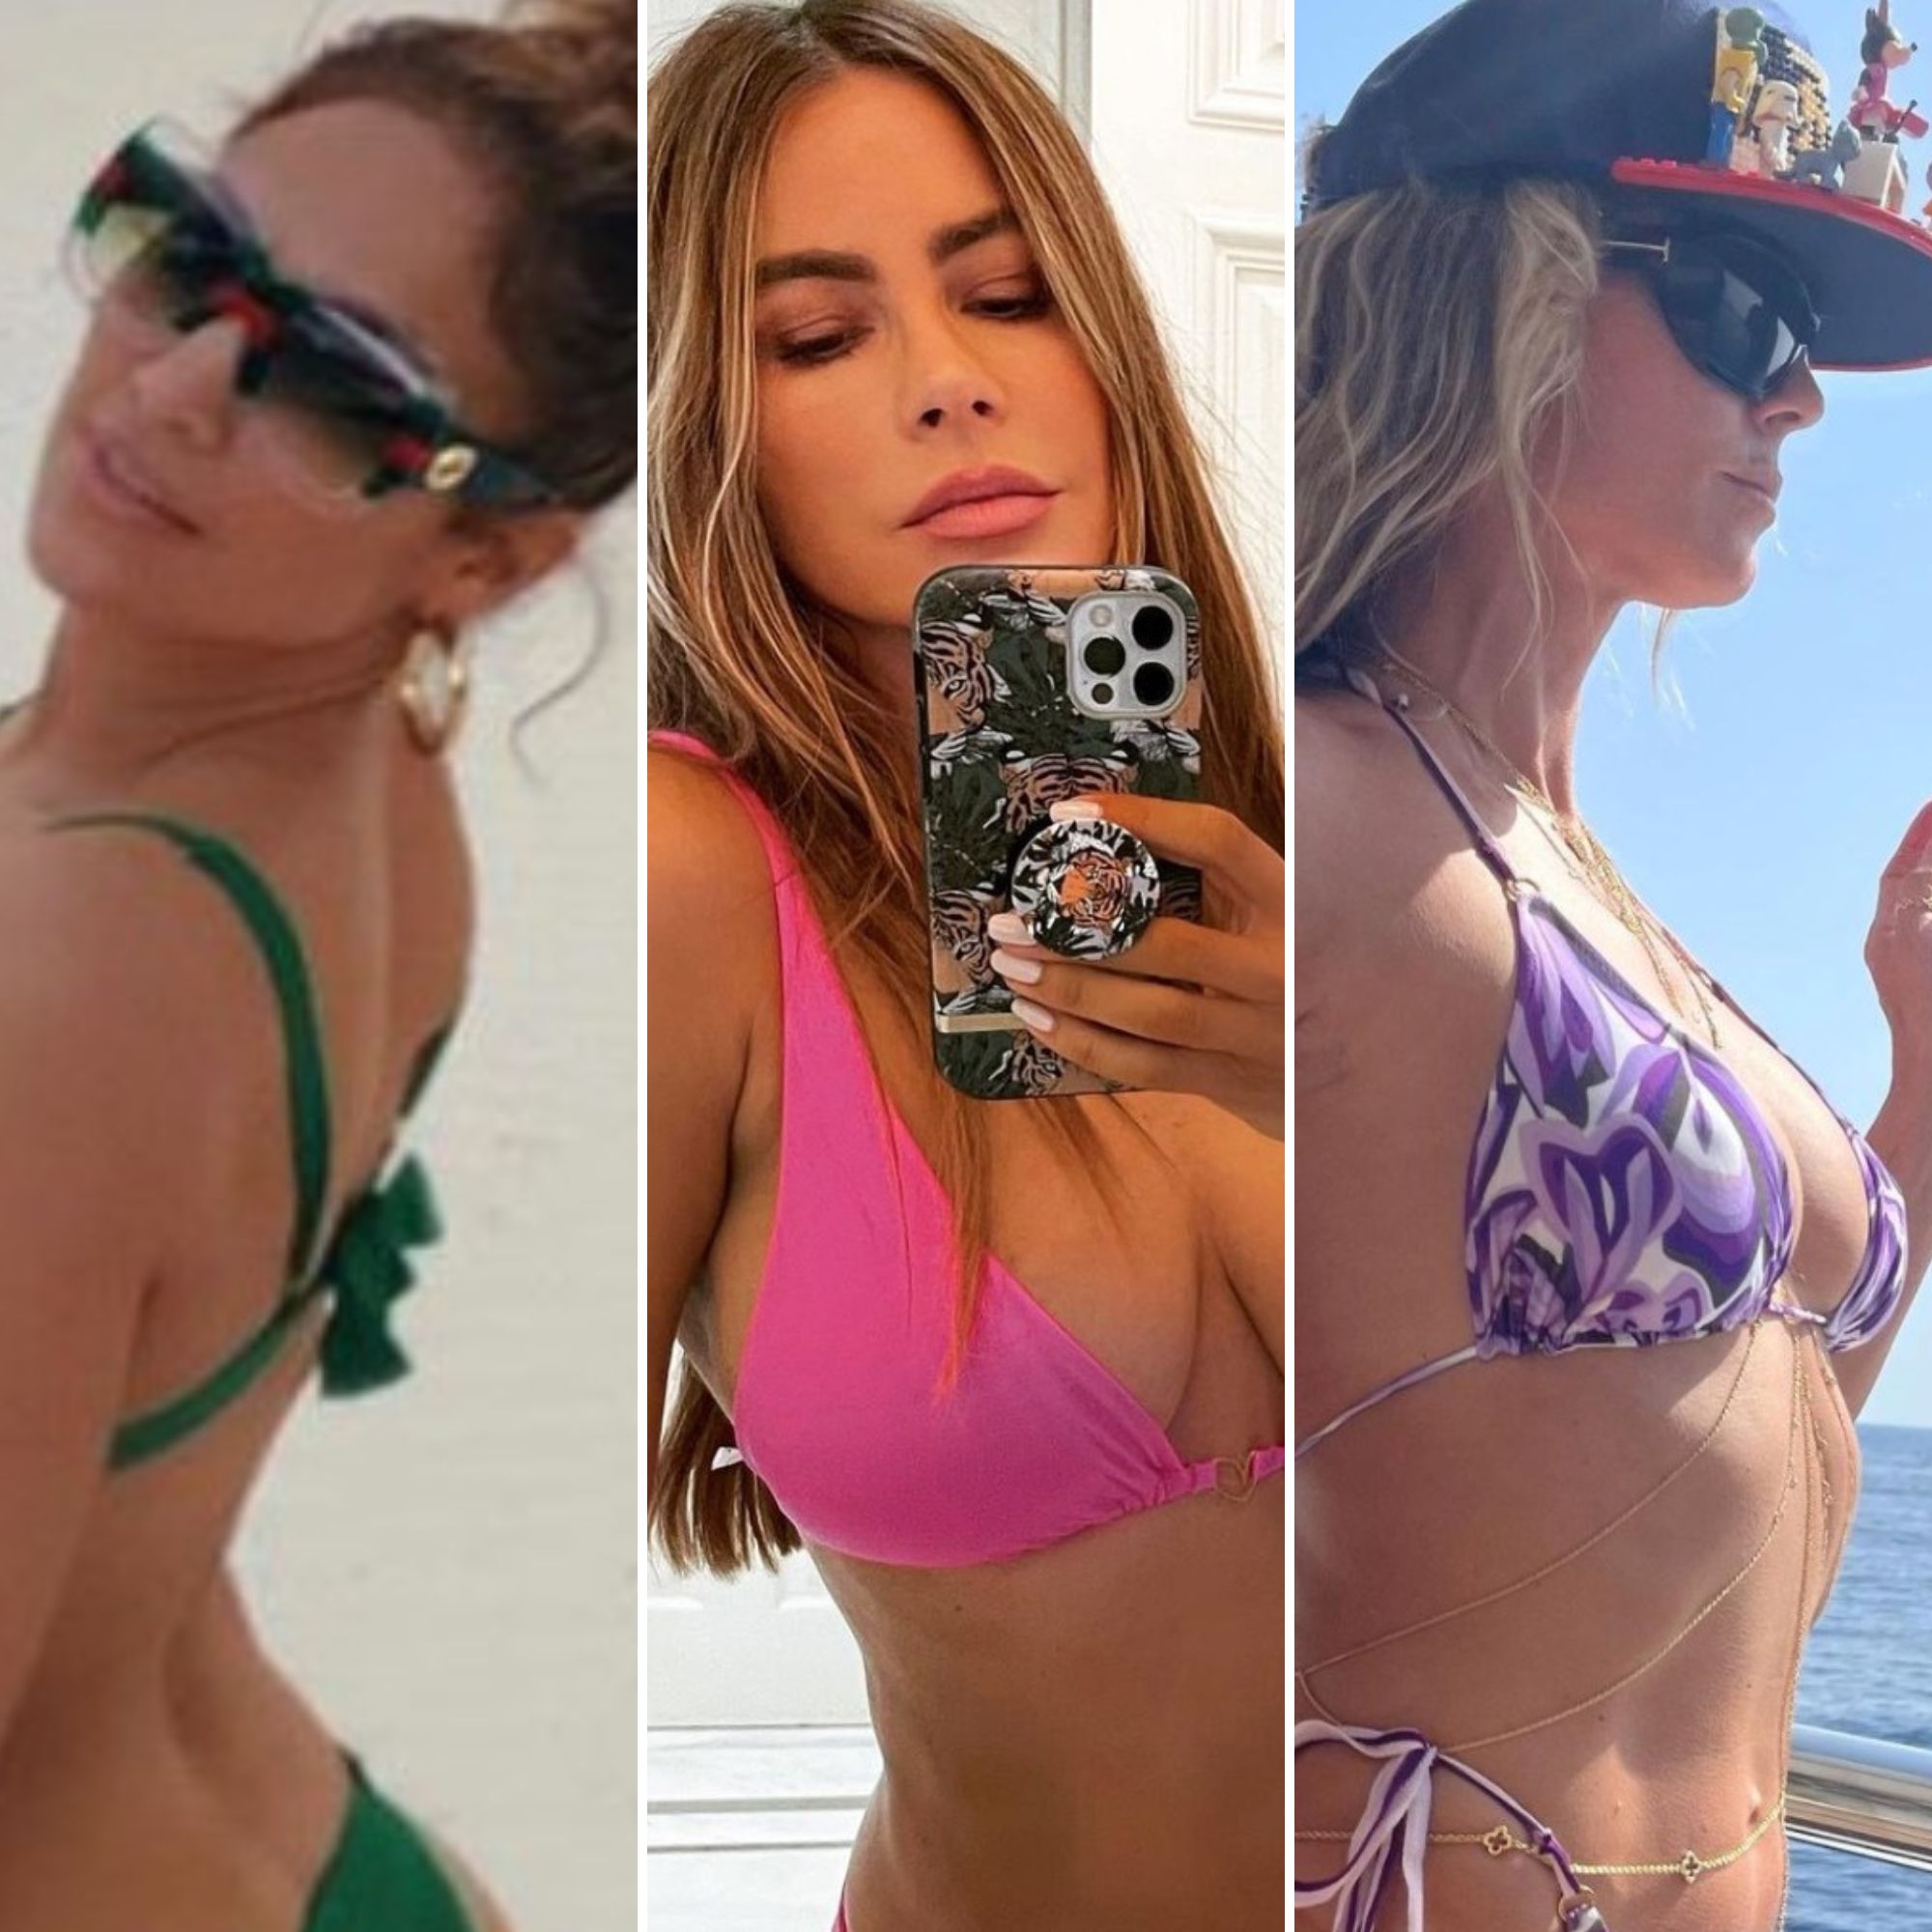 Sexy Naked Beach Girls - Celebrity Bikini Pictures: A-Listers Over 40 Who Look Amazing!